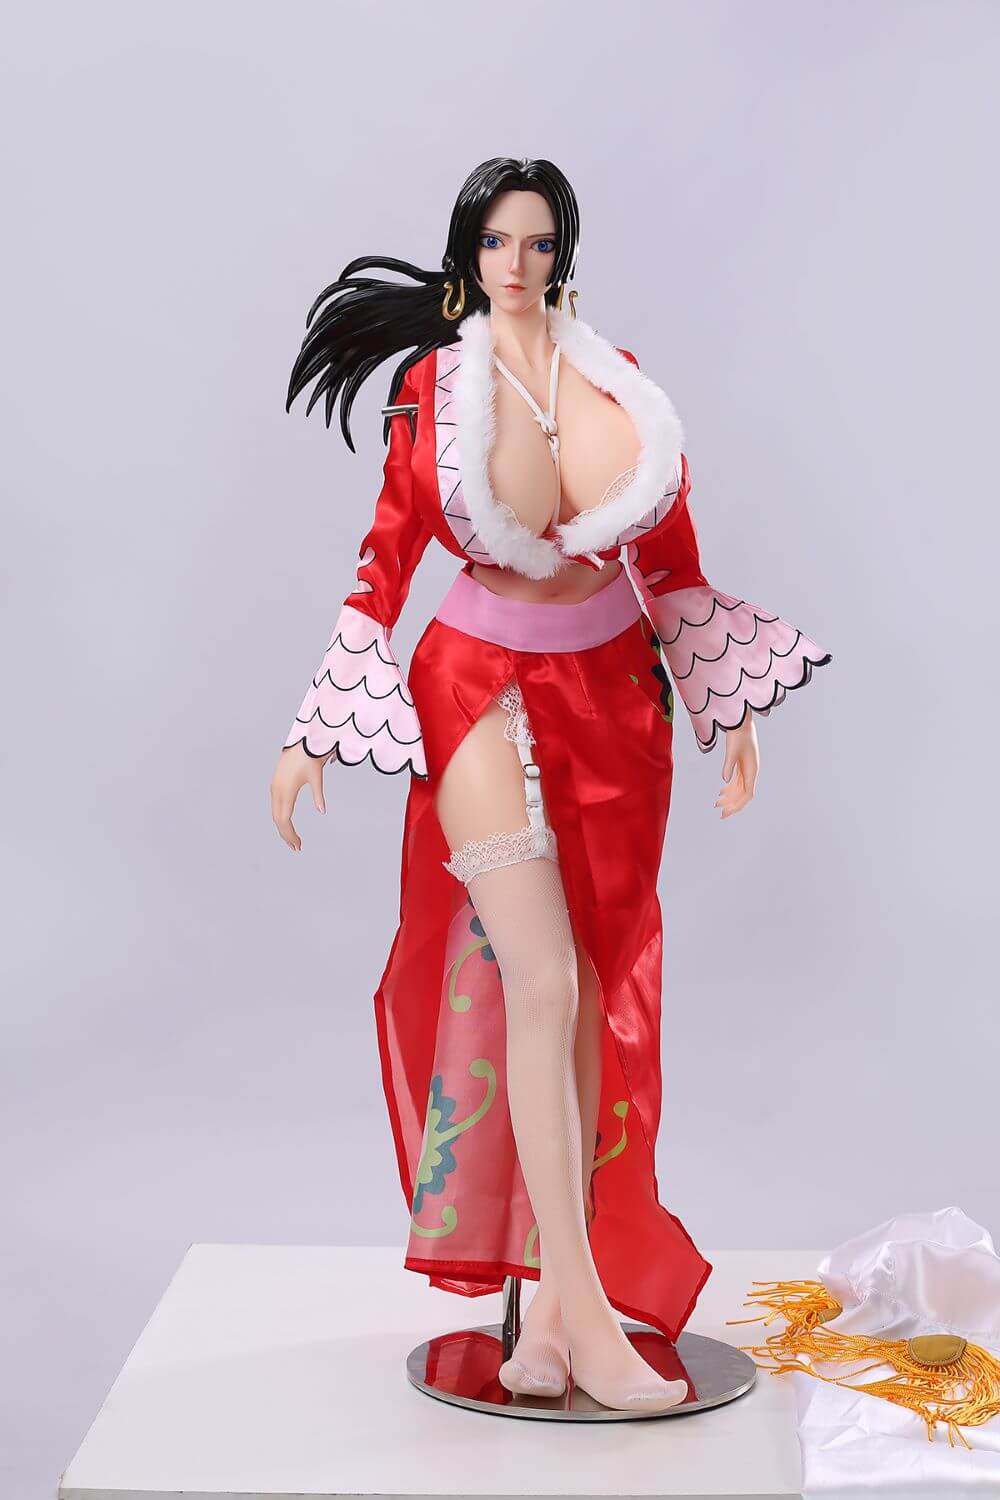 65cm Anime Sex Doll Boa Hancock in her famous costumes